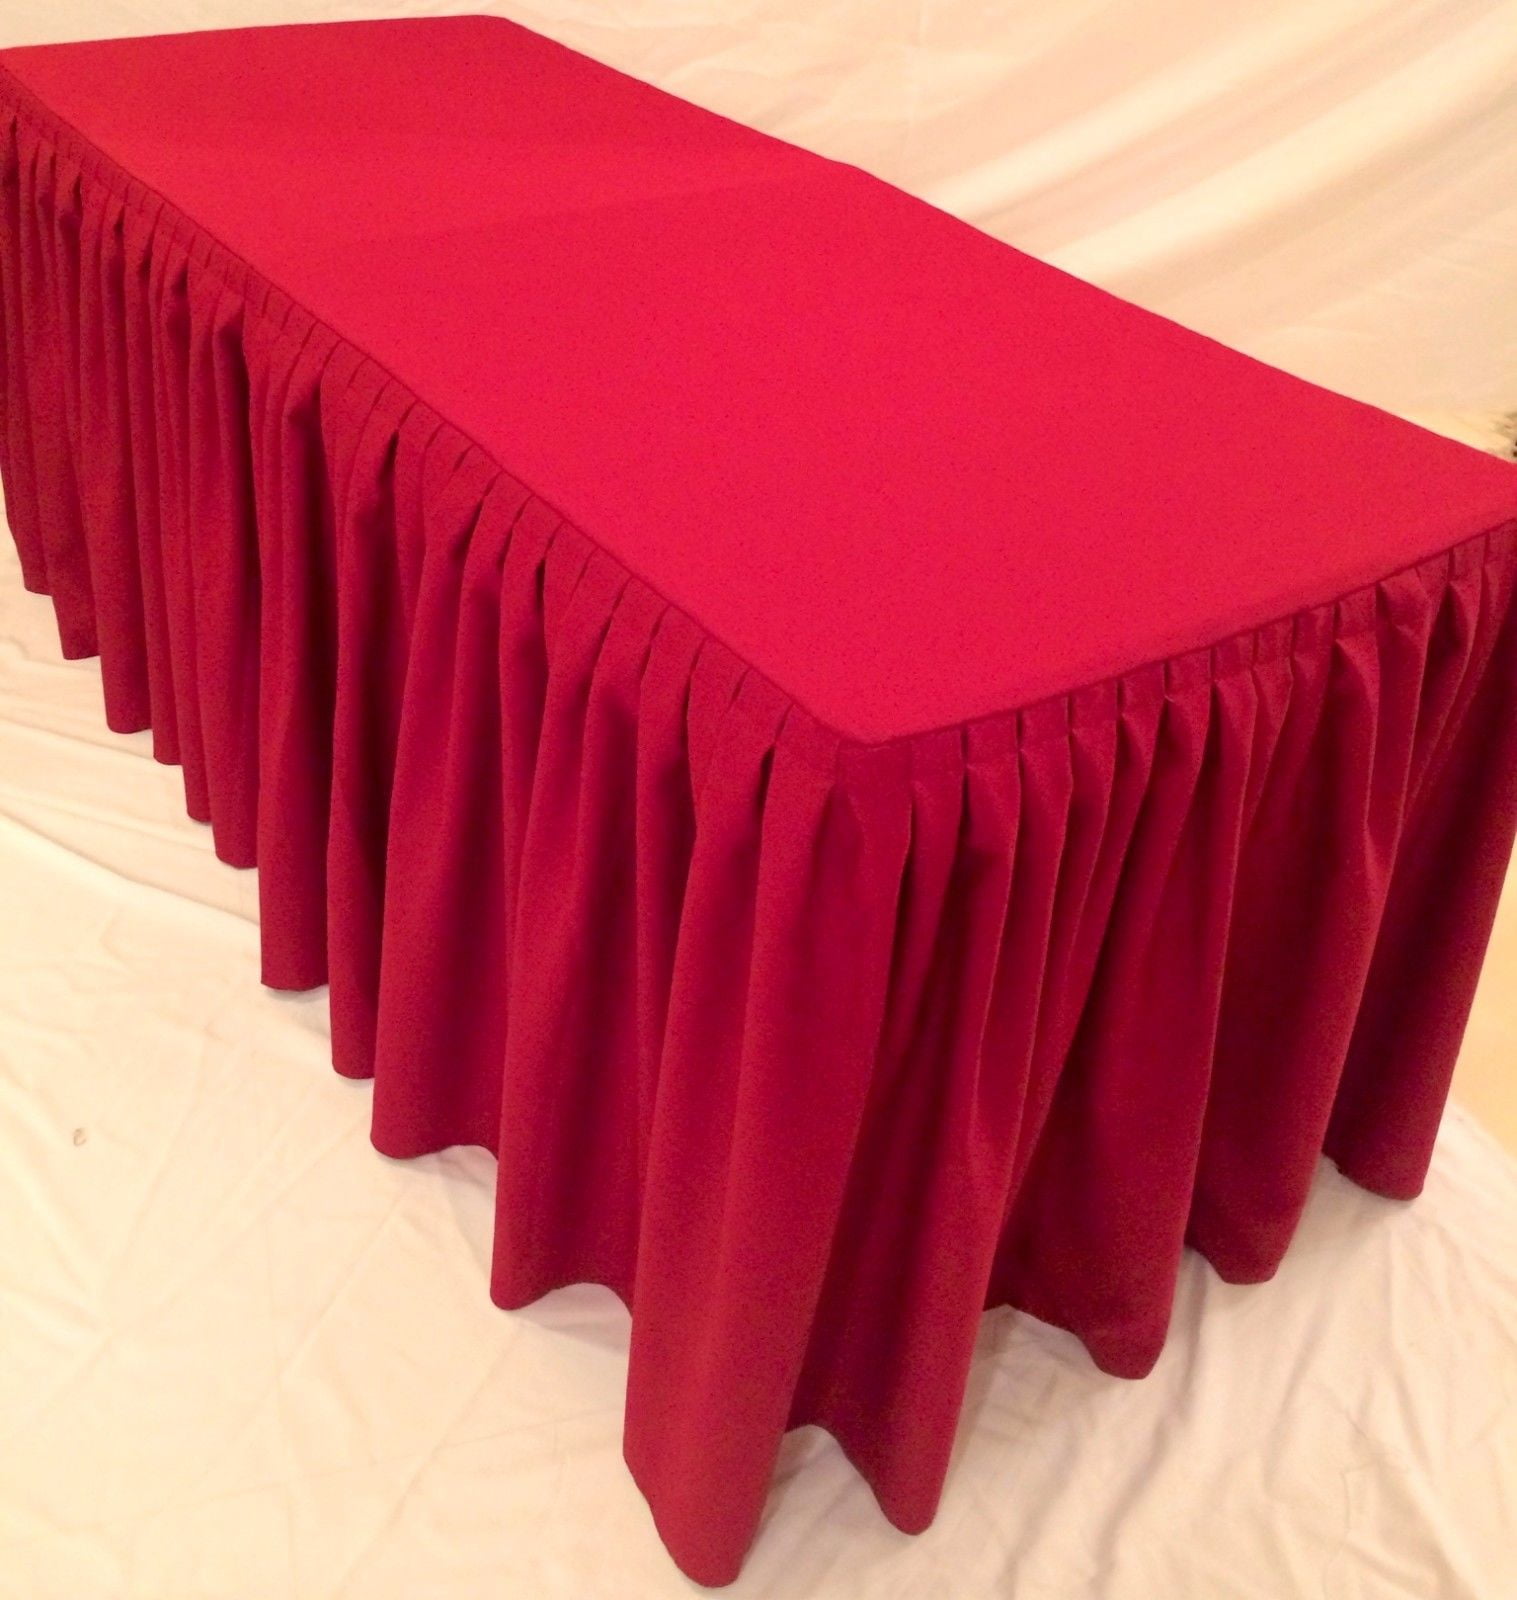 17' Ft POLYESTER PLEATED TABLE SET SKIRT skirting Trade show 24 colors Catering 